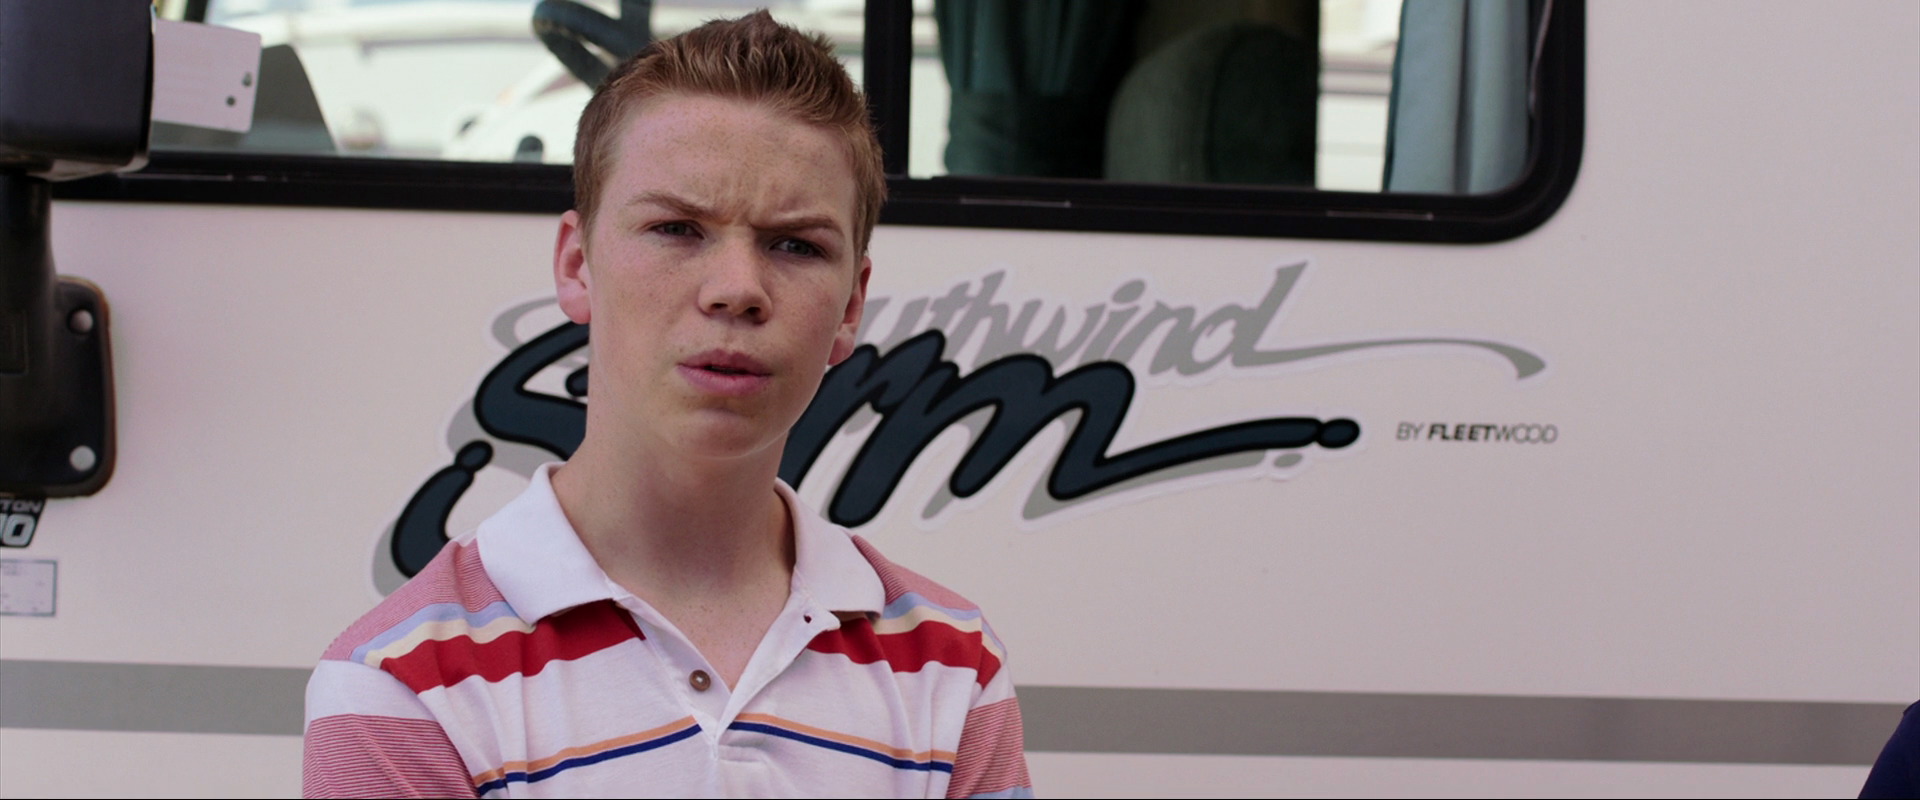 Screen Captures - were-the-millers-1510 - Will Poulter Photo Gallery.